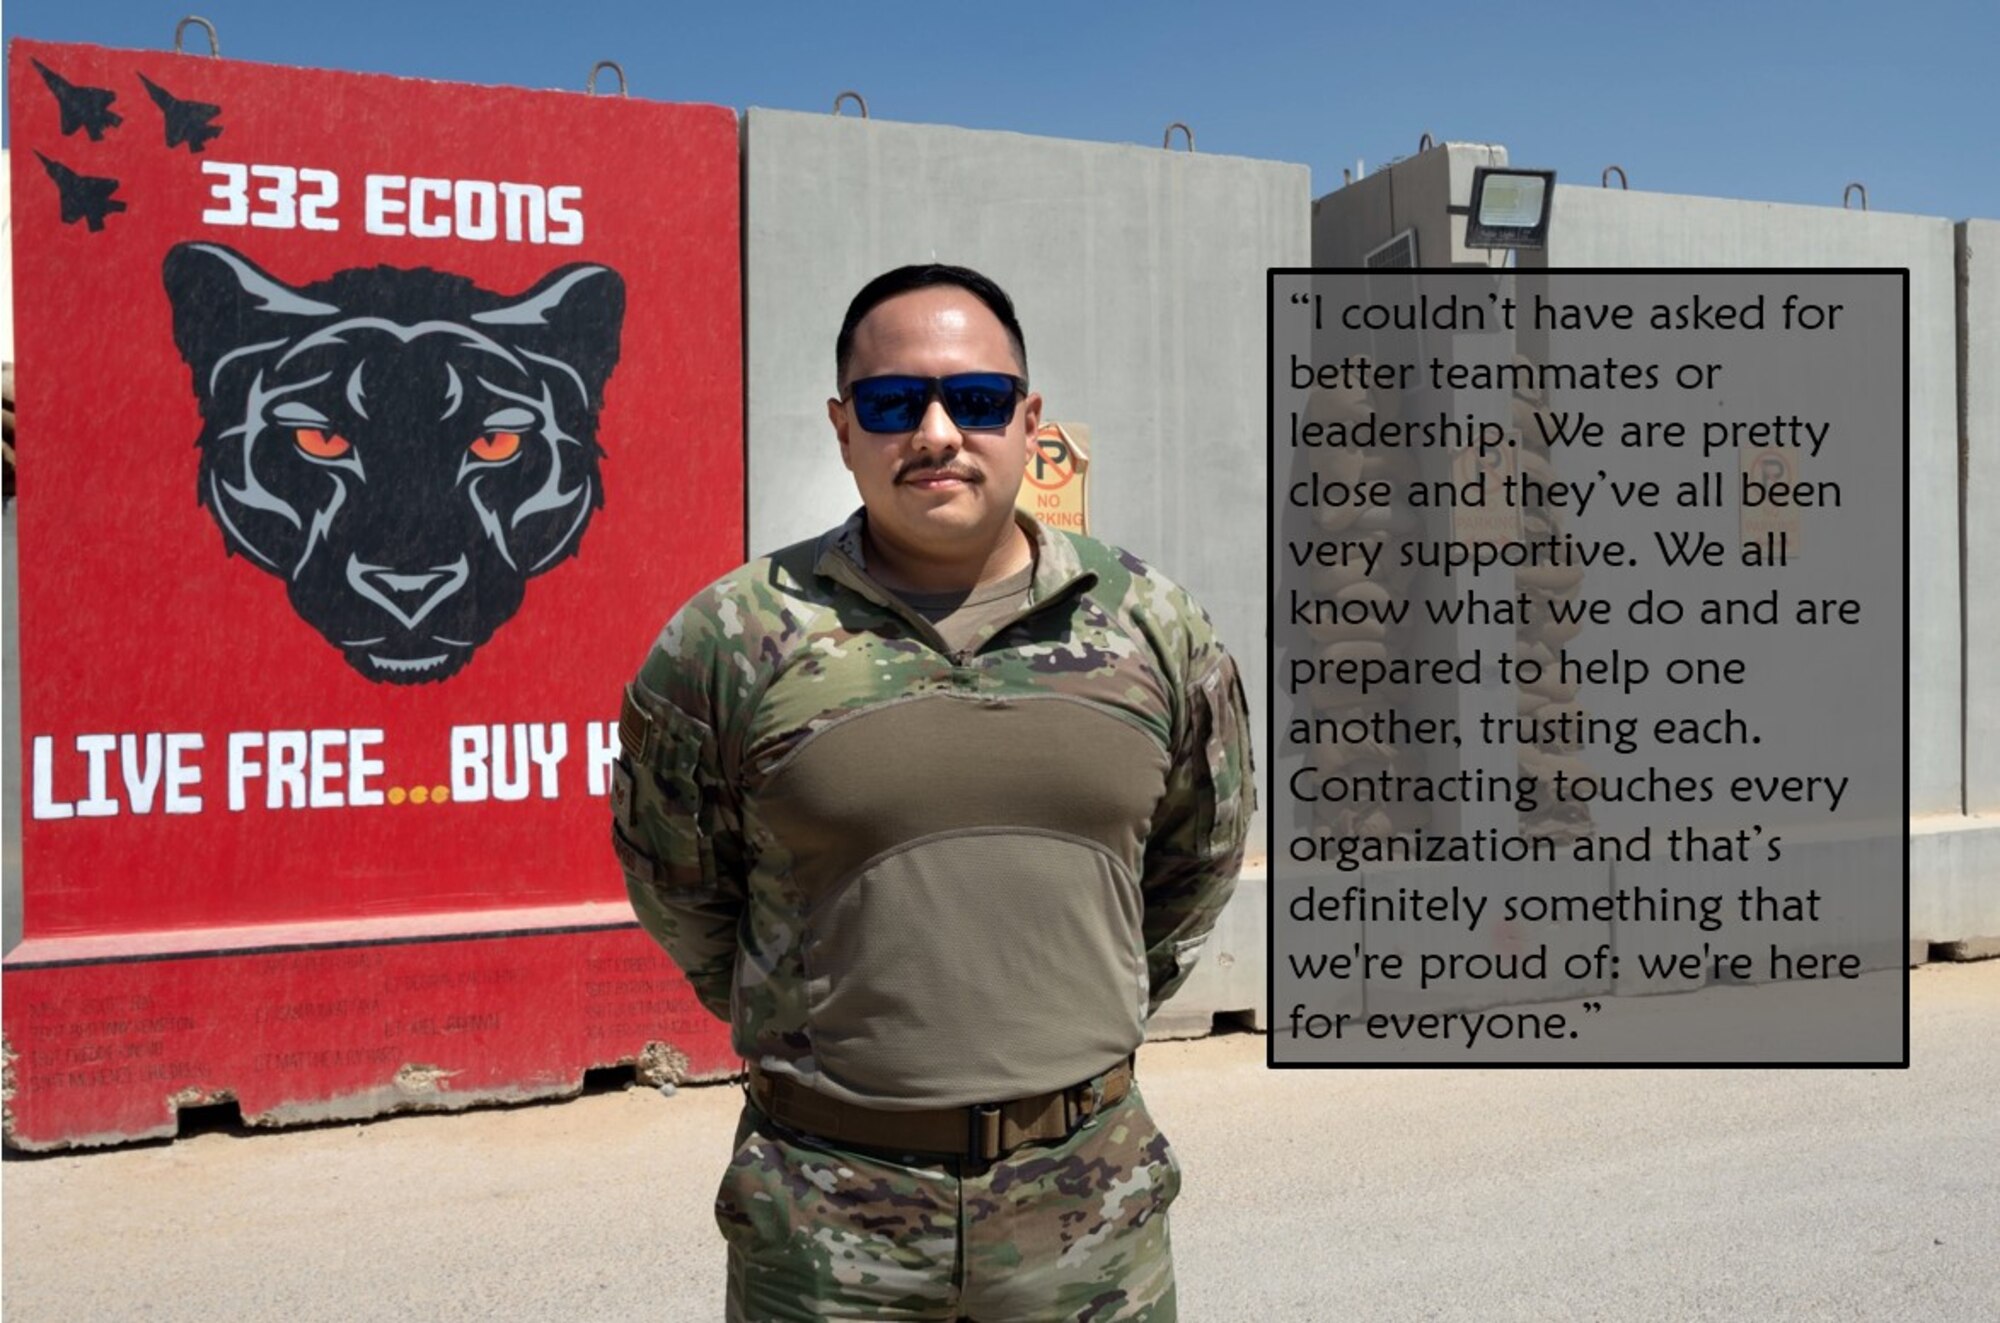 The 332d Air Expeditionary Wing's Warrior of the Week for the week of May 23, is Staff Sgt. Elias Campos, Expeditionary Contracting Squadron contingency contracting officer. Warrior of the Week is a competitive recognition program that highlights significant contributions made by individual Airmen who raise the Red Tail standard and enhance the mission and capabilities of the 332d Air Expeditionary Wing. (U.S. Air Force photo illustration by Tech. Sgt. Lauren M. Snyder)